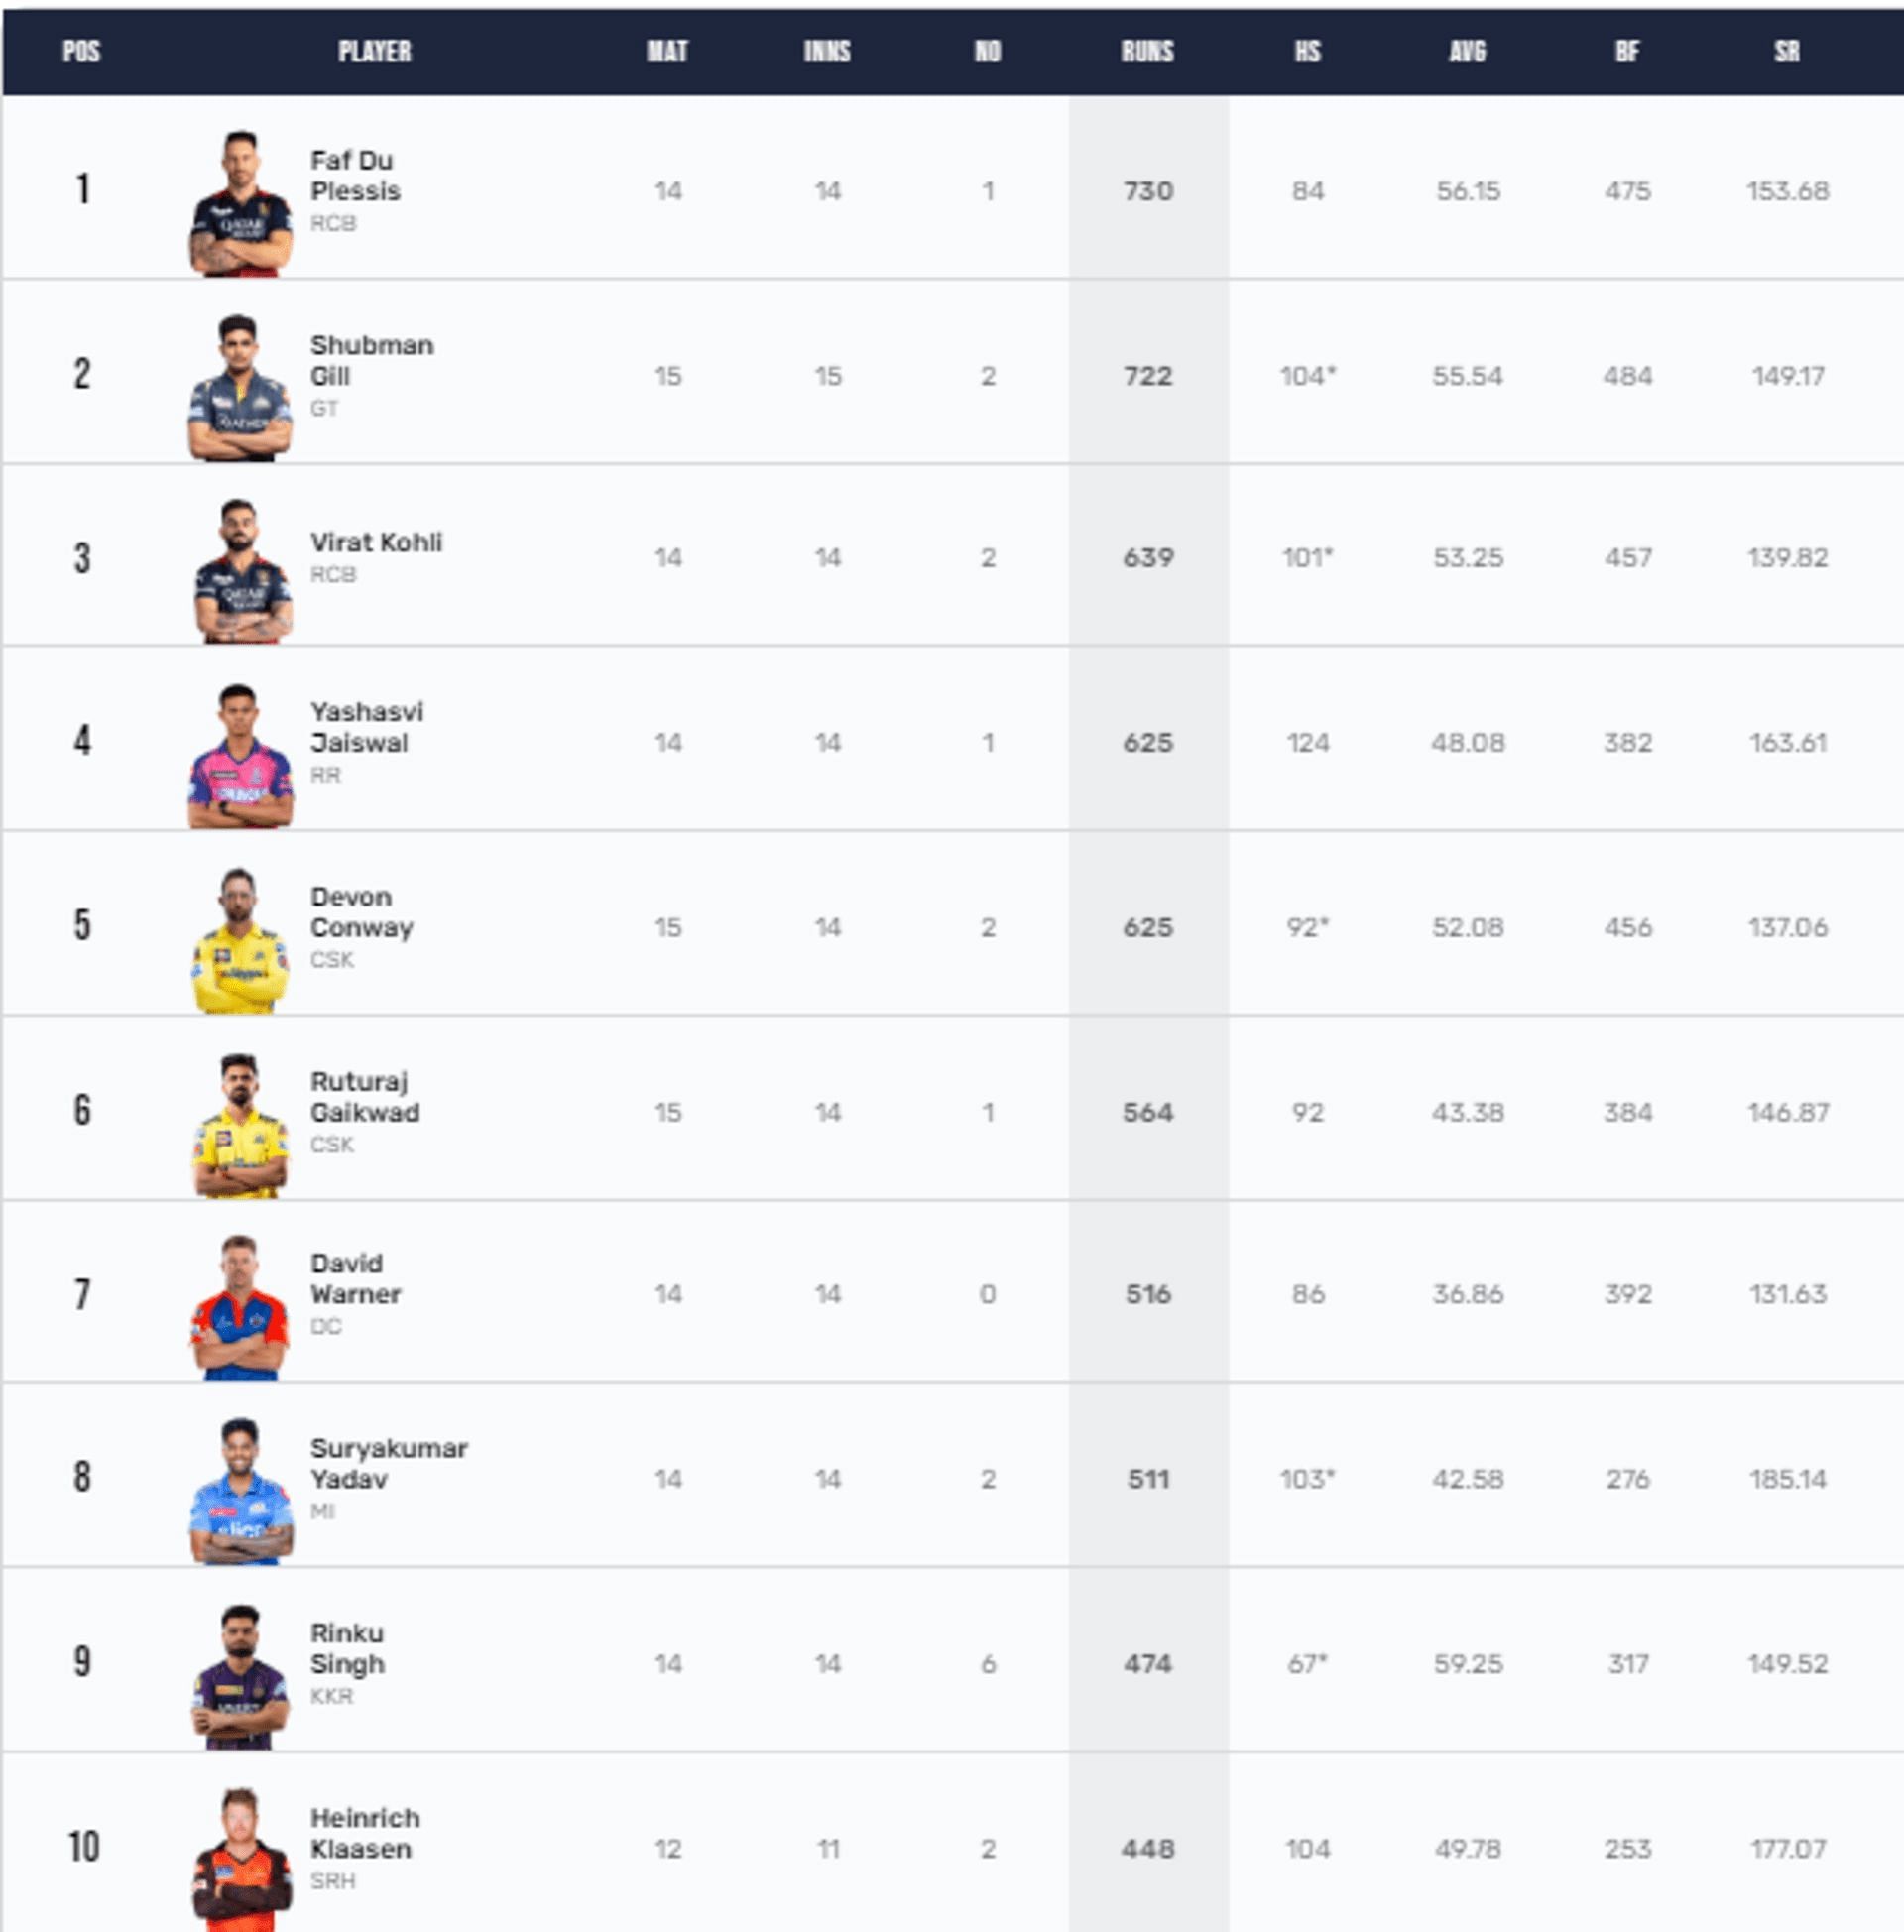 Both CSK openers feature among the top ten run-getters in IPL 2023